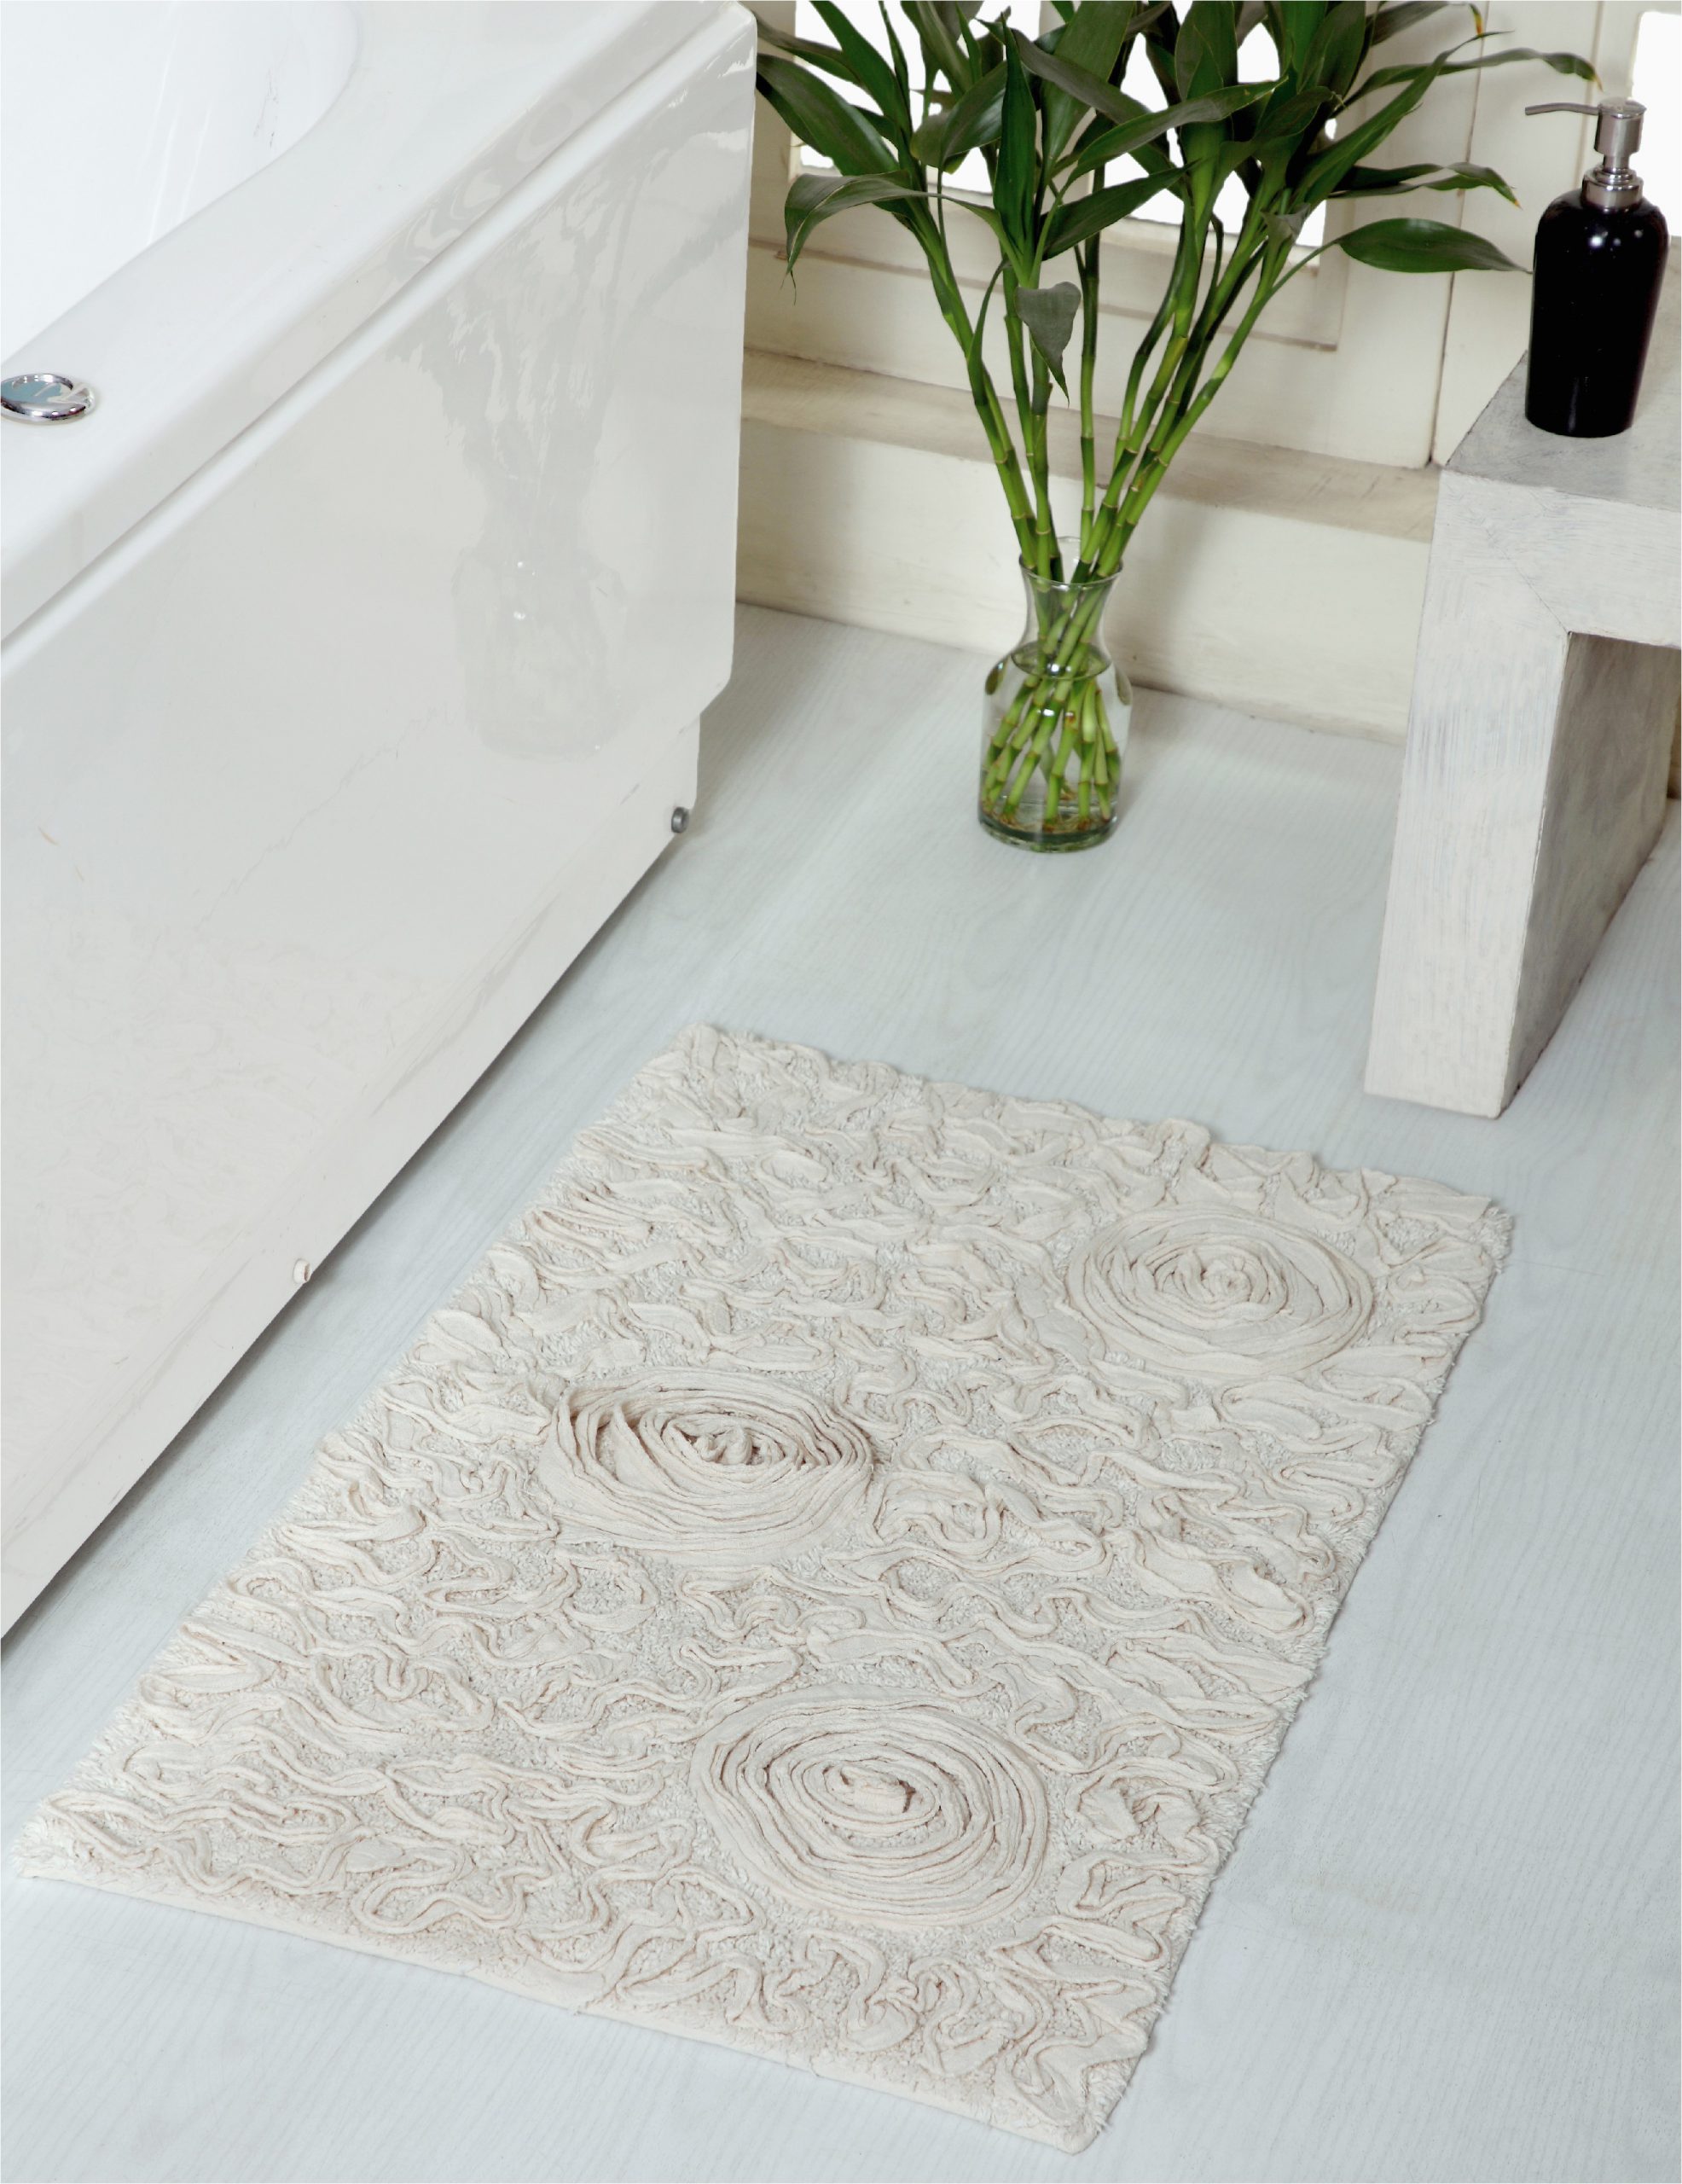 At Home Bathroom Rugs Home Weavers Bell Flower Collection Absorbent Cotton soft Bathroom Machine Wash Dry 21"x34" Natural Walmart